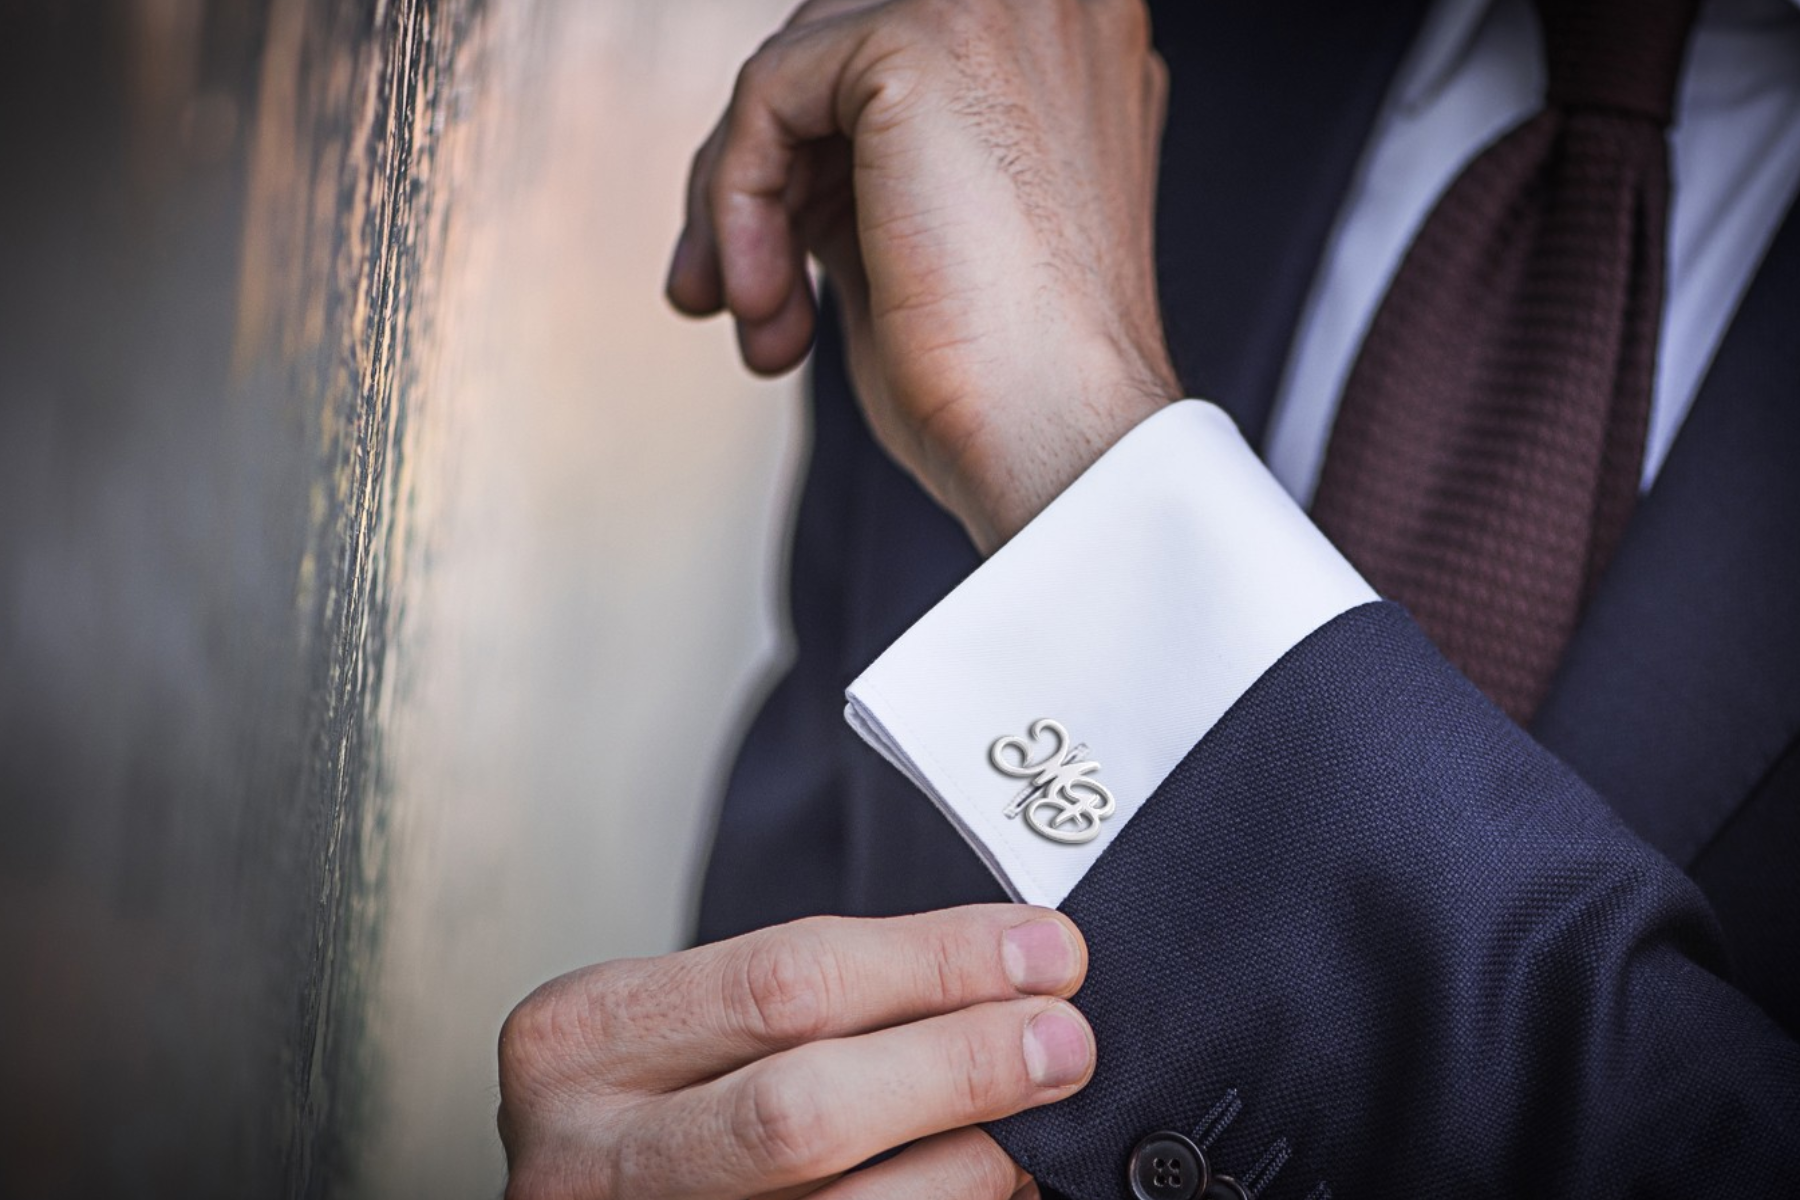 A customized cufflink worn by a man in a formal suit